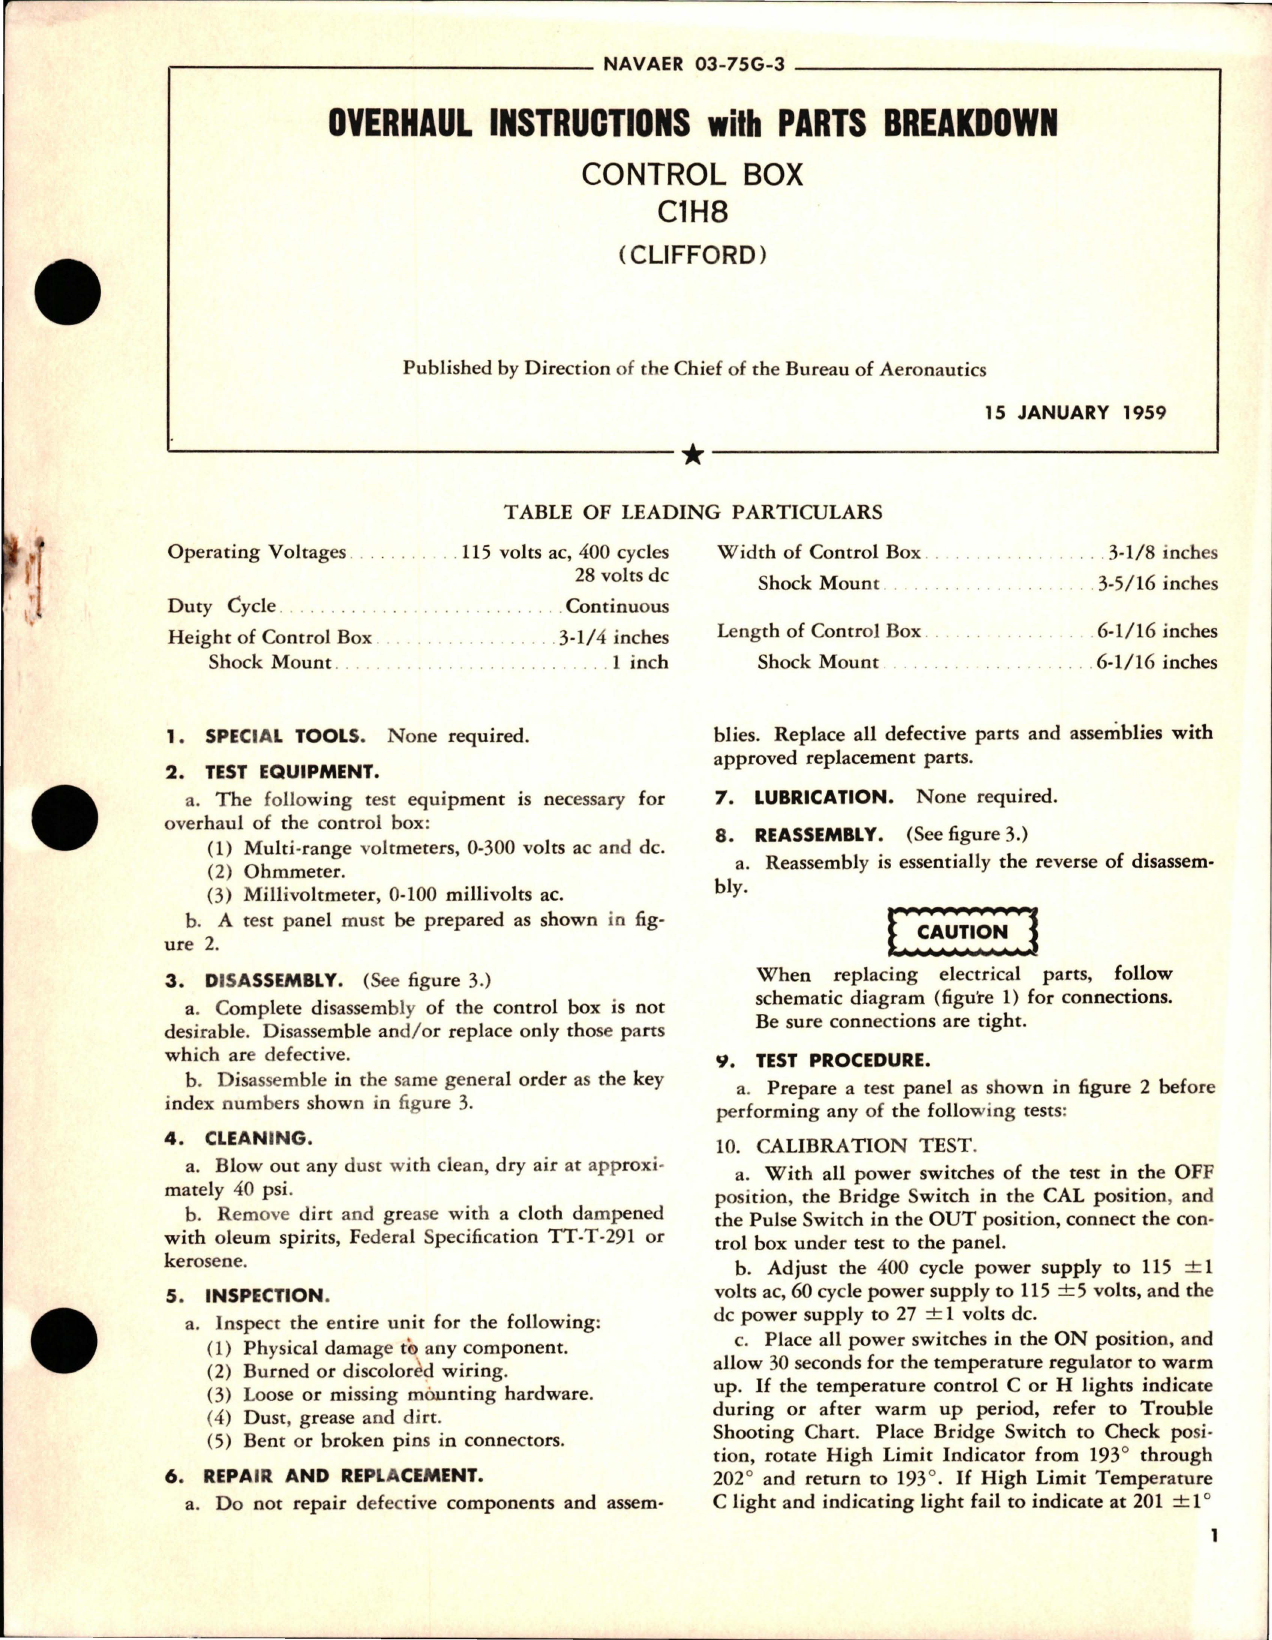 Sample page 1 from AirCorps Library document: Overhaul Instructions with Parts Breakdown for Control Box - C1H8